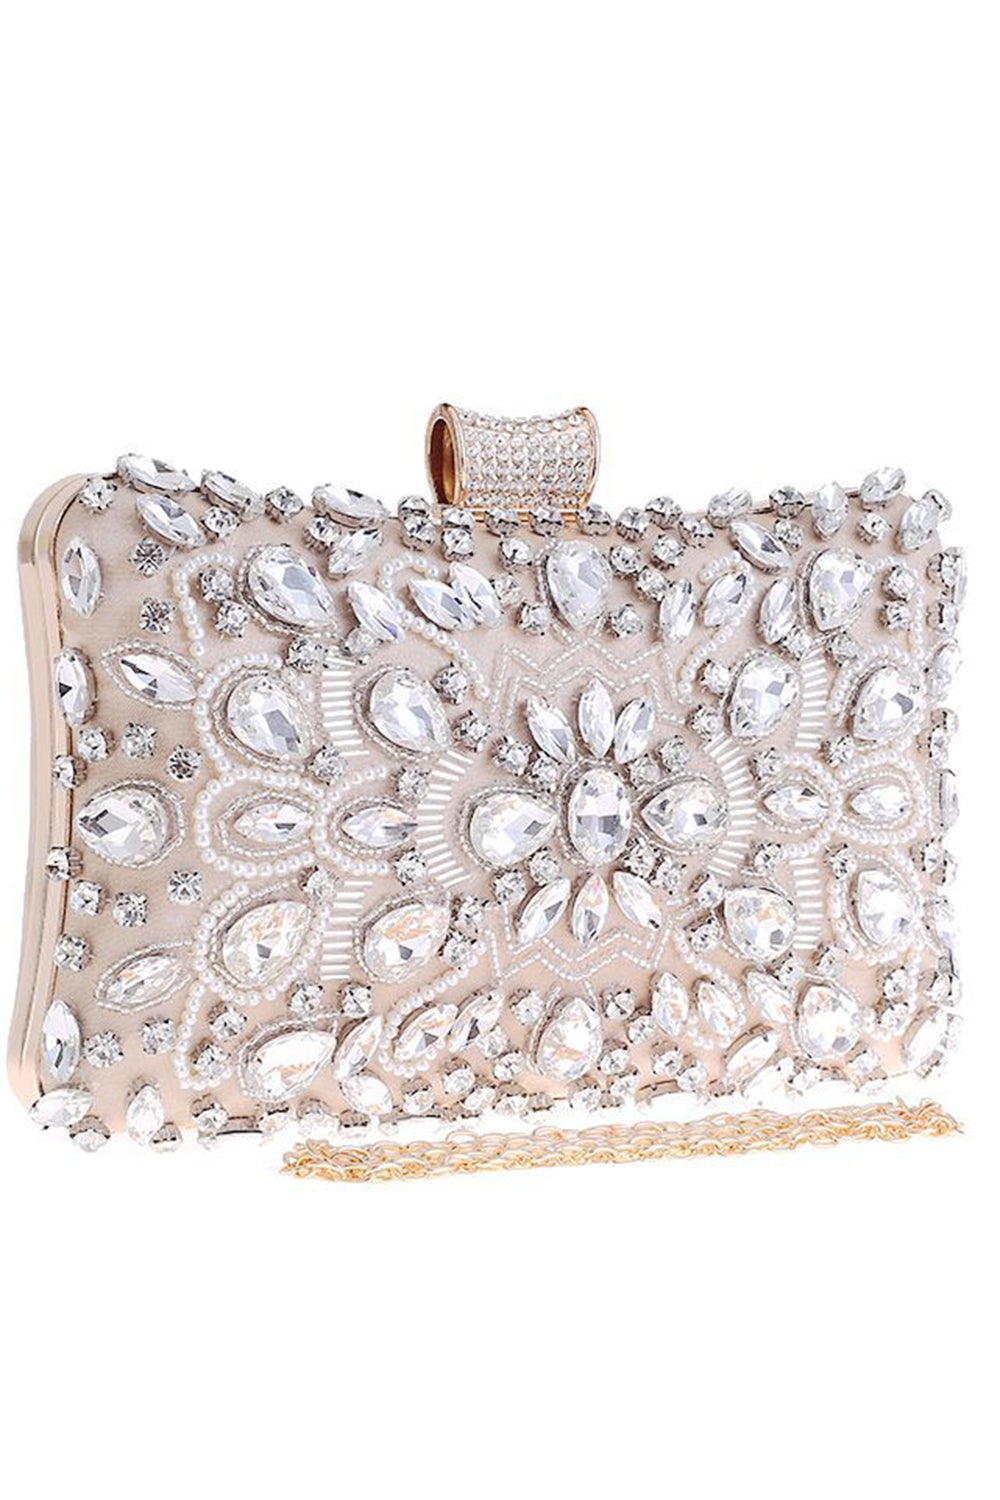 Black Party Clutch with Crystals